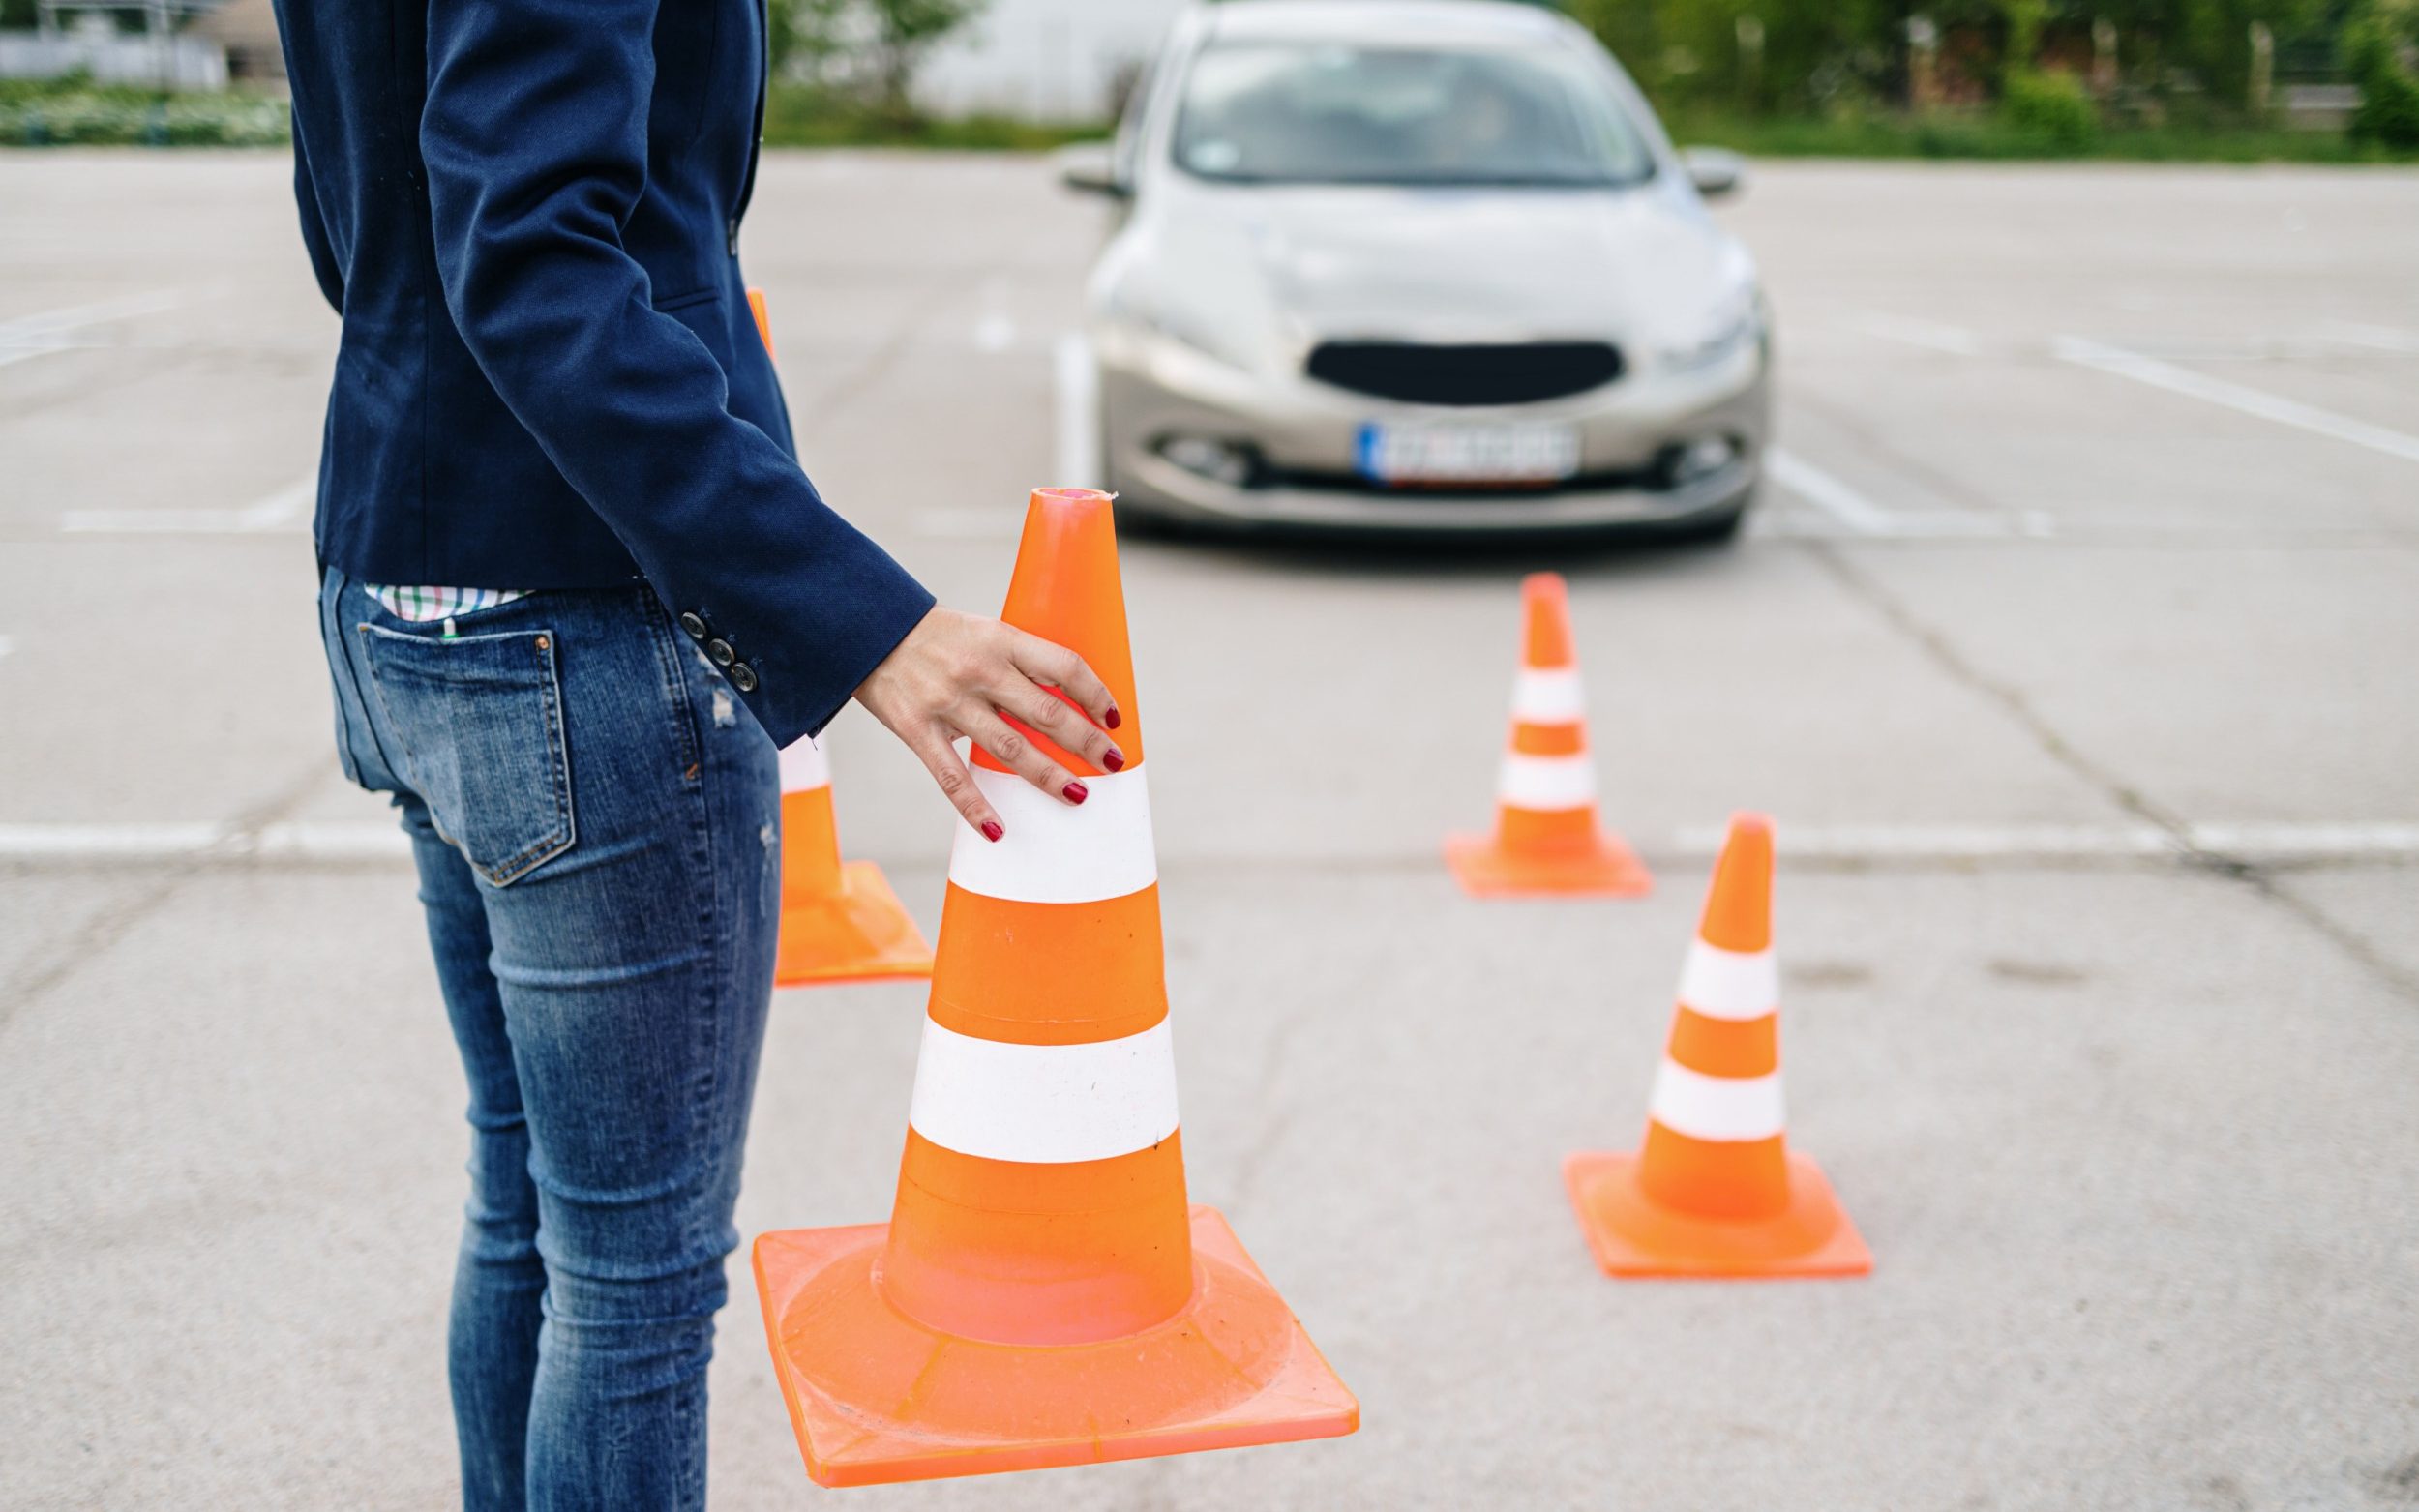 over half of drivers would fail theory test resit, says survey